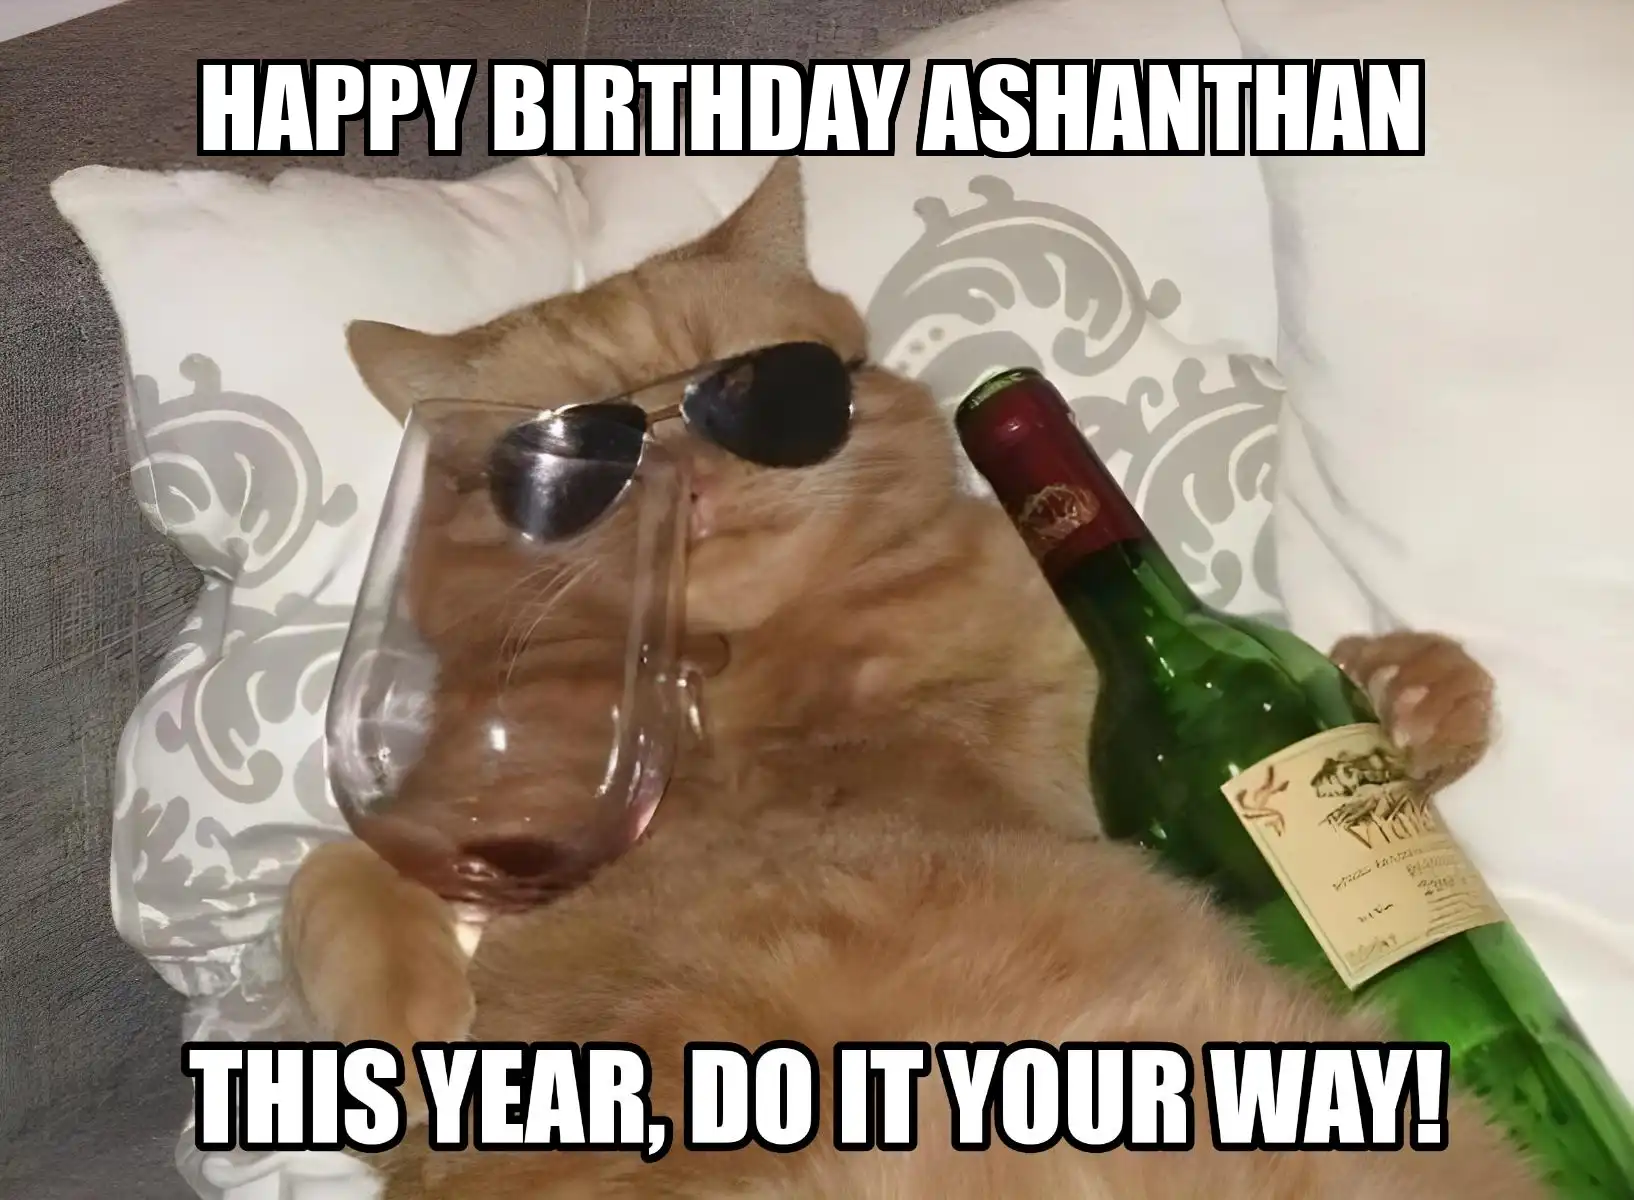 Happy Birthday Ashanthan This Year Do It Your Way Meme